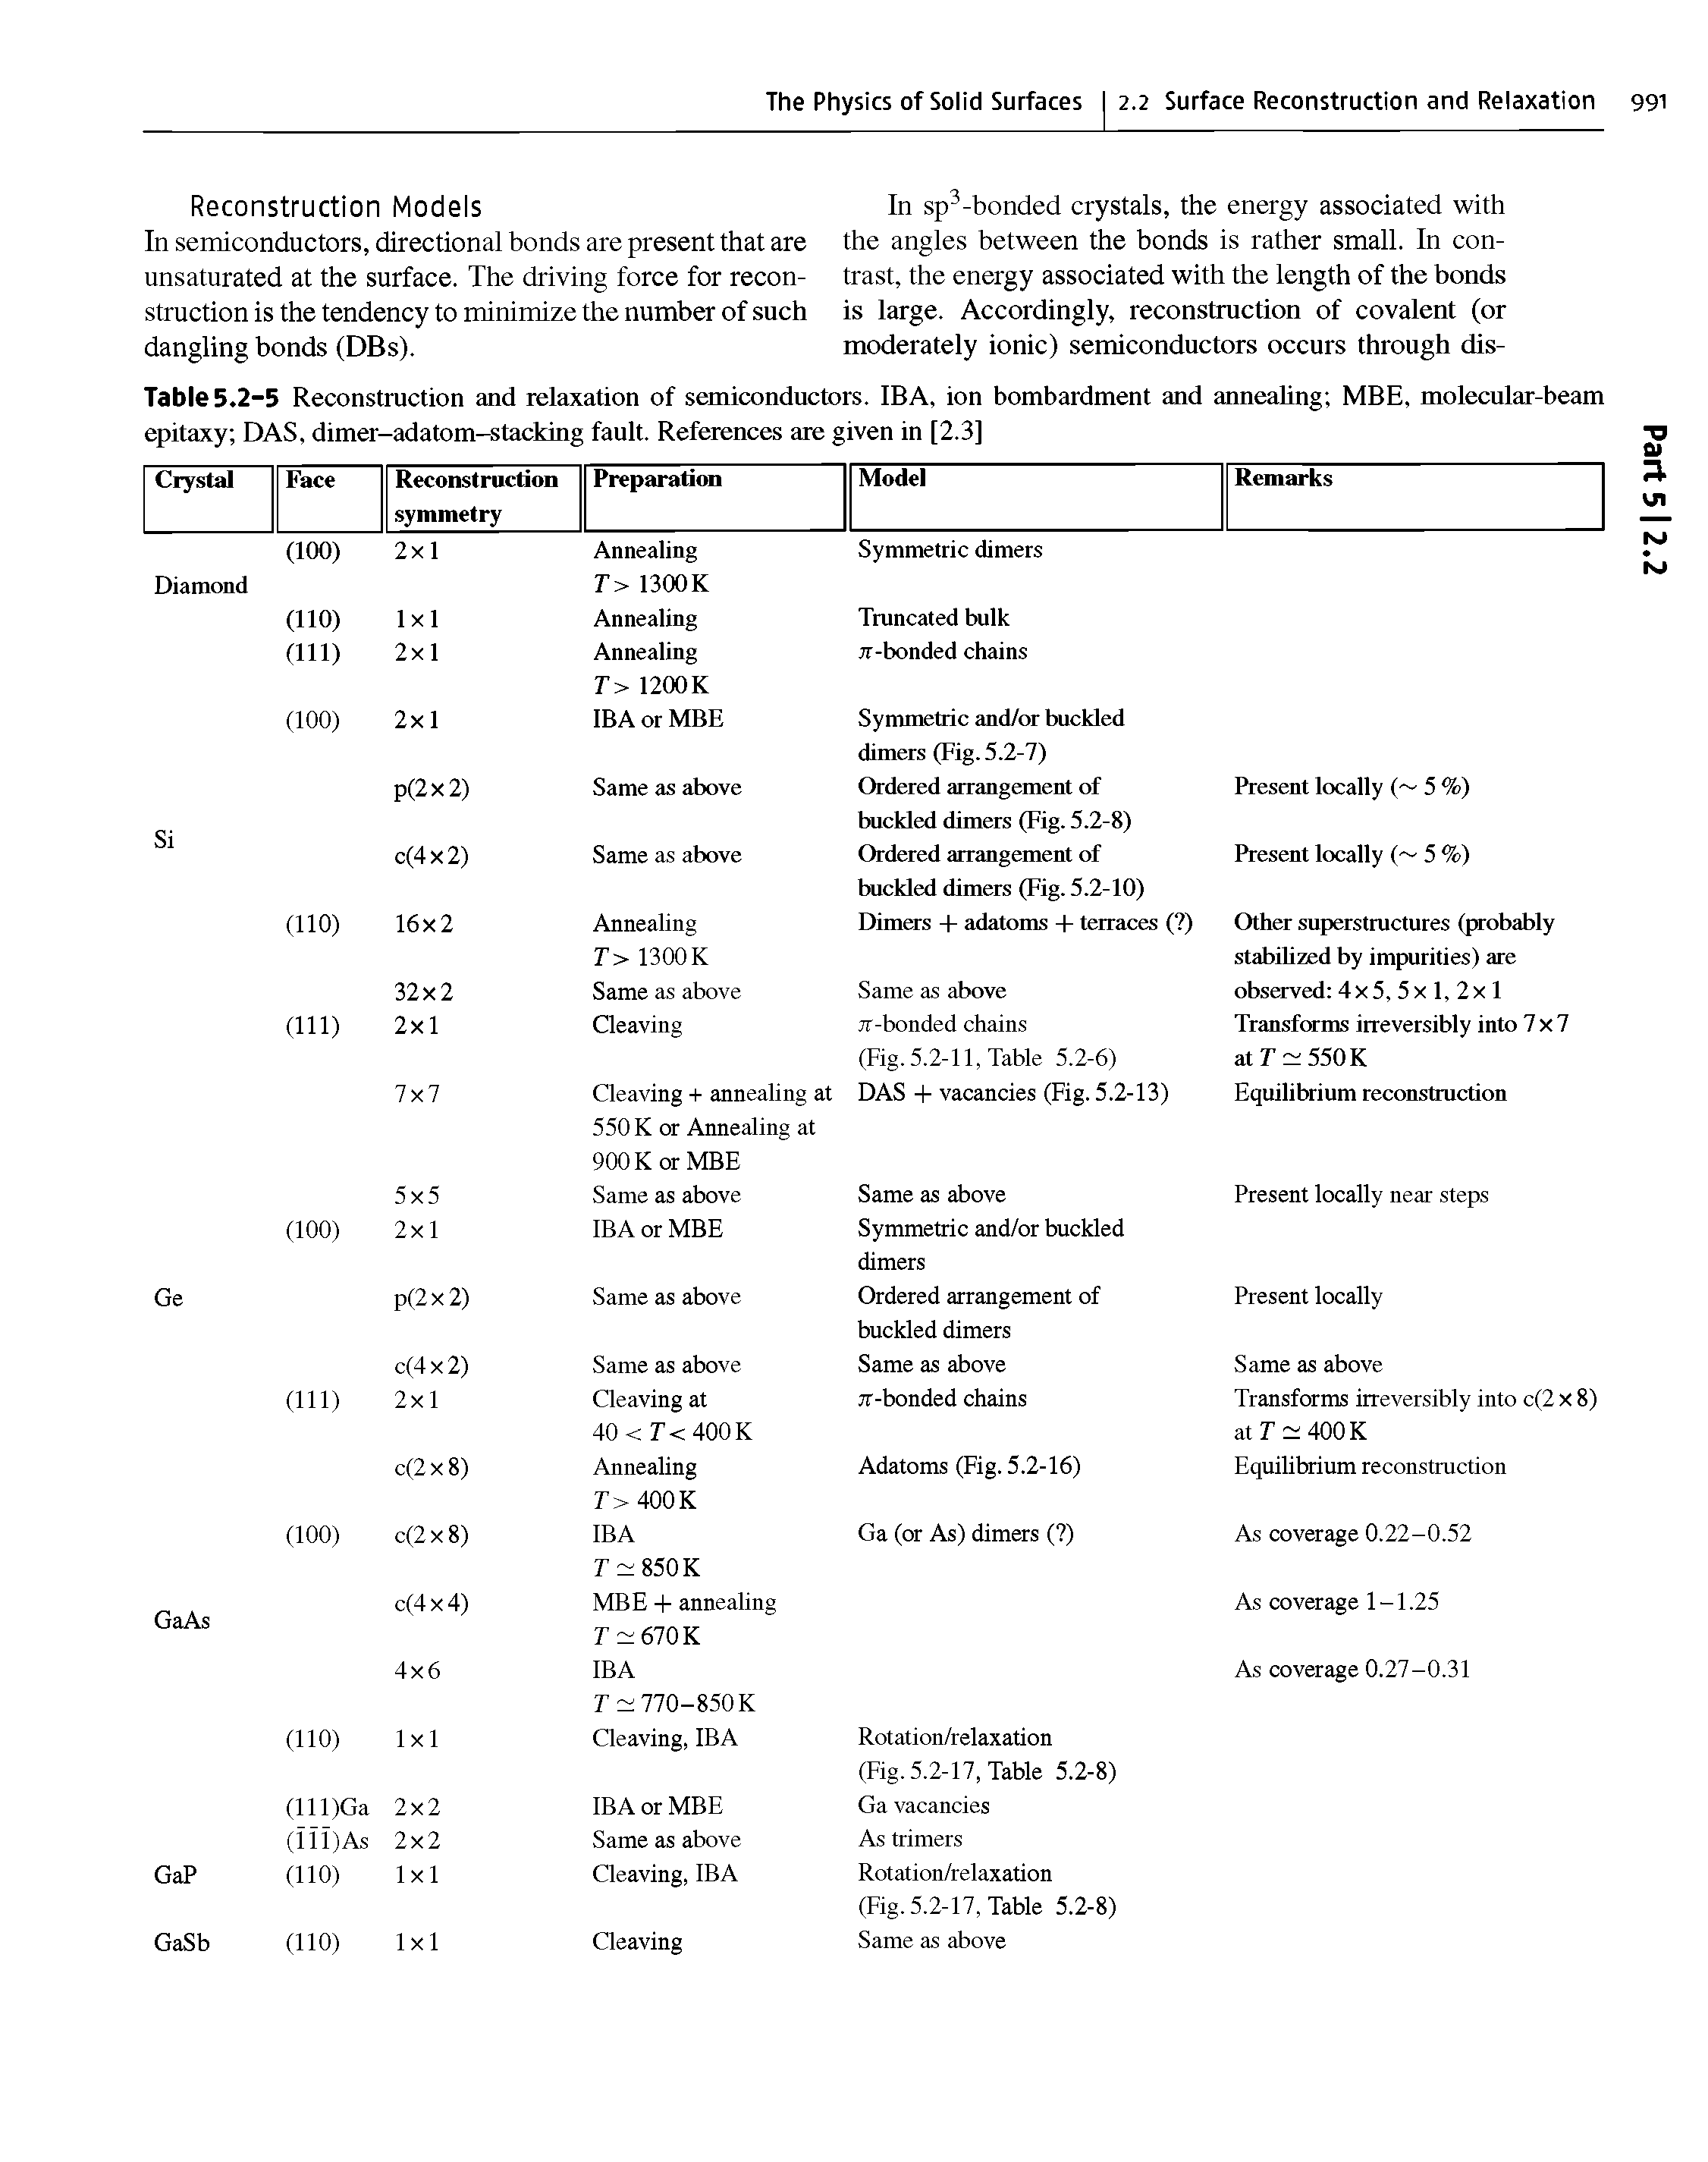 Table 5.2-5 Reconstruction and relaxation of semiconductors. IB A, ion bombardment and annealing MBE, molecular-beam epitaxy DAS, dimer-adatom-stacking fault. References are given in [2.3]...